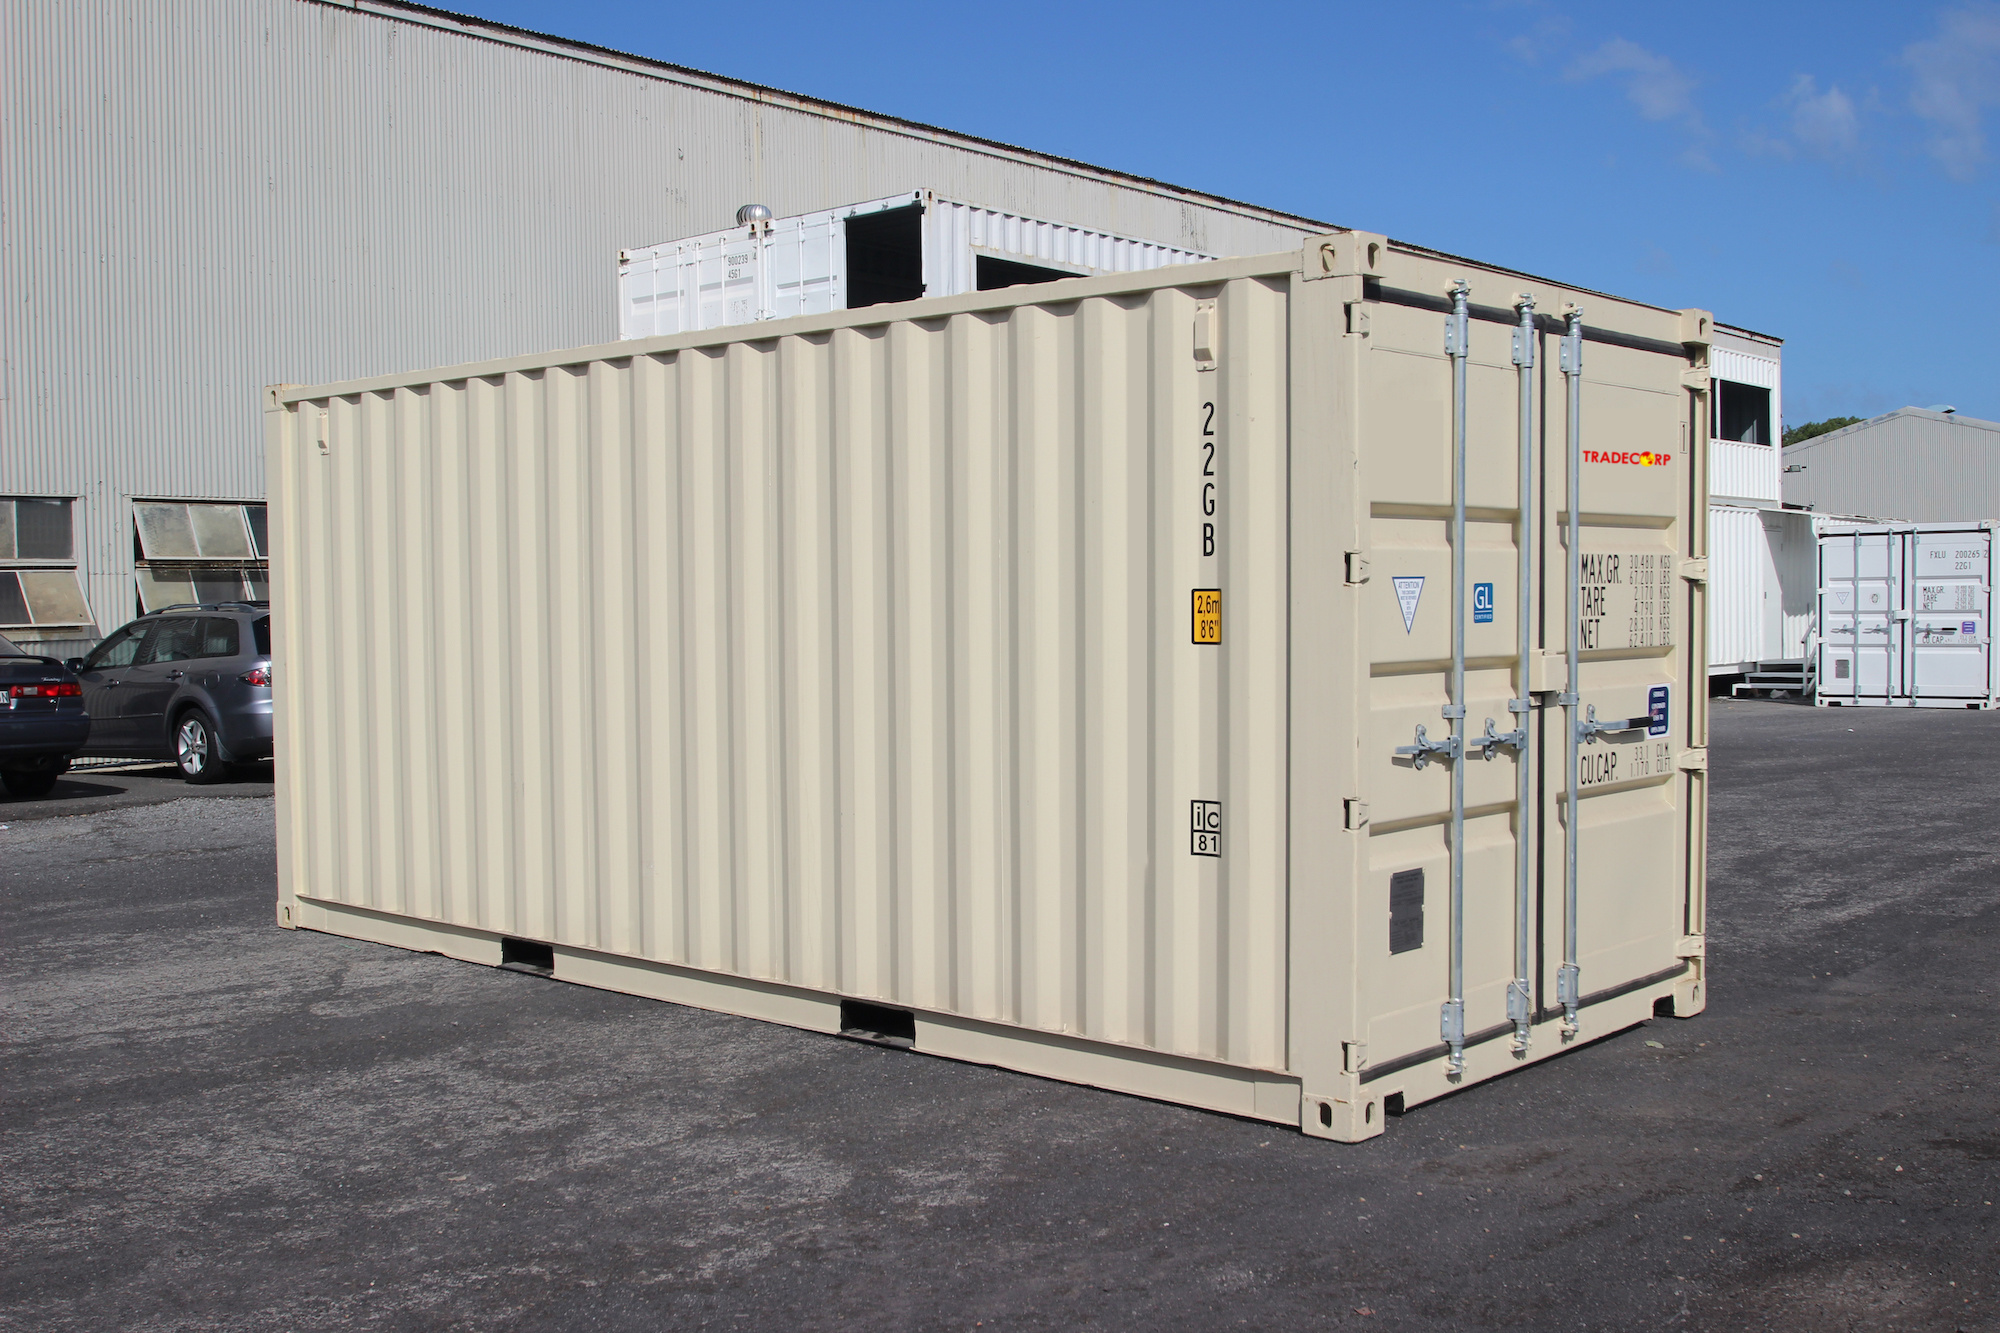 Standard Shipping Container hire tradecorp international